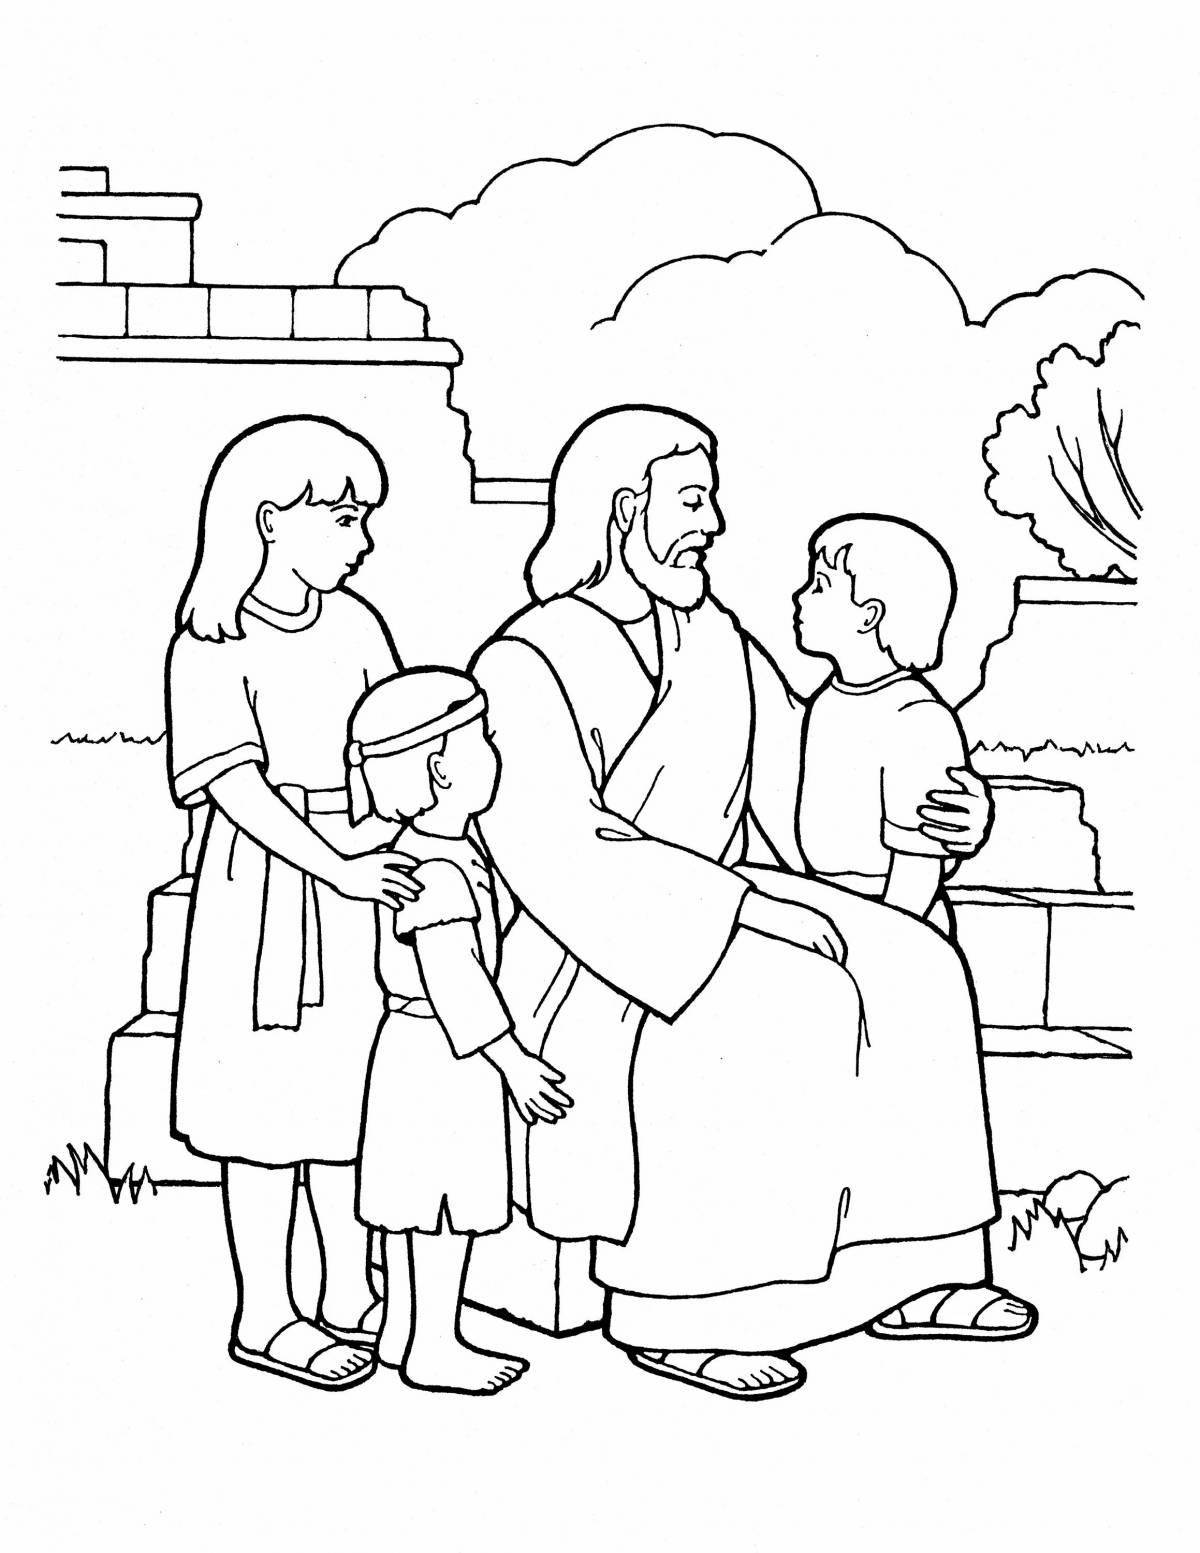 Coloring page charming jesus for kids